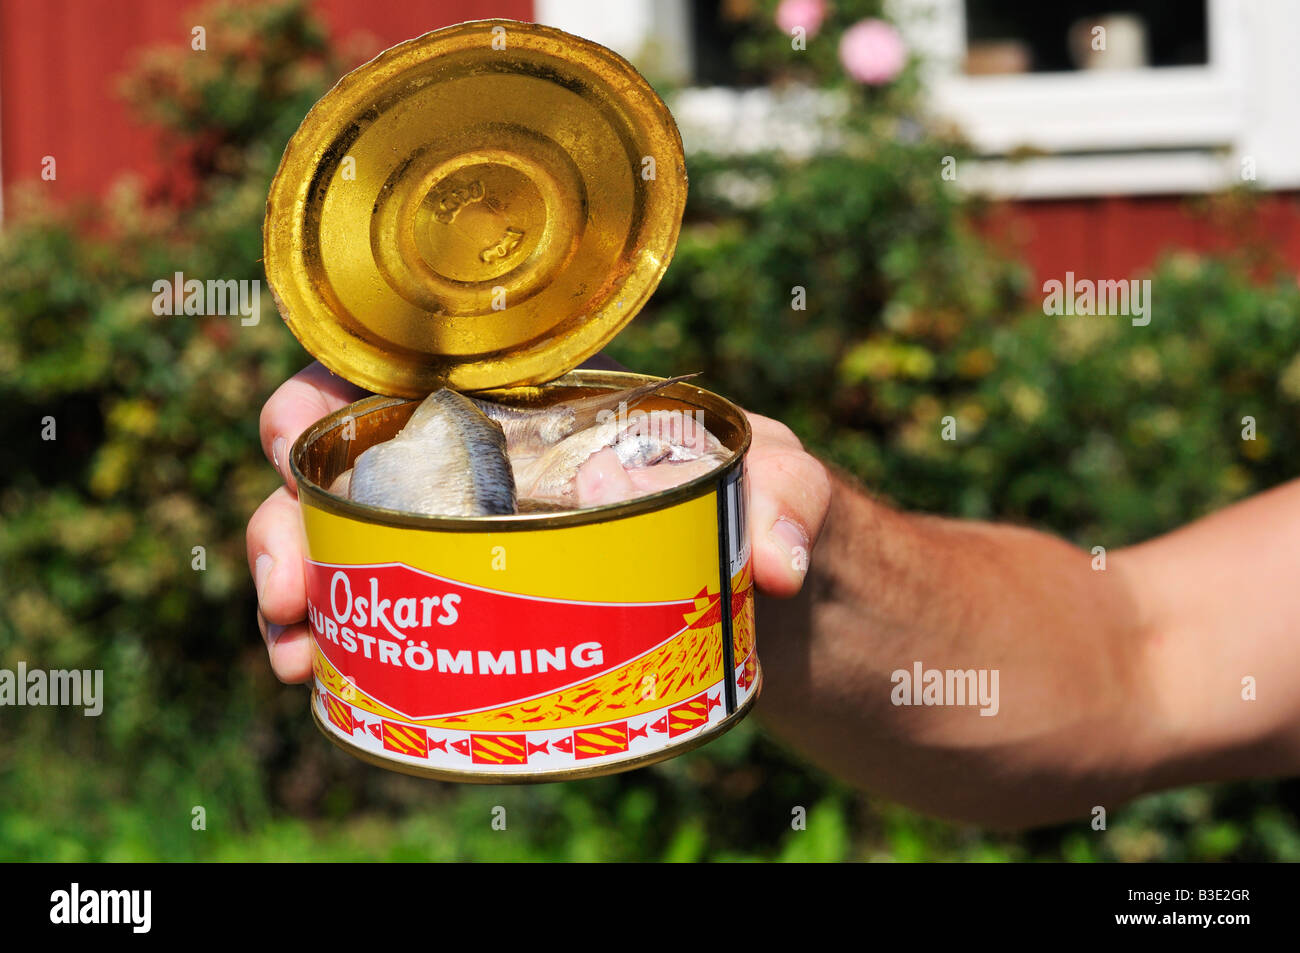 Surstromming Fermented baltic herring in a opened can a Swedish delicacy Stockholms Lan Sweden August 2008 Stock Photo